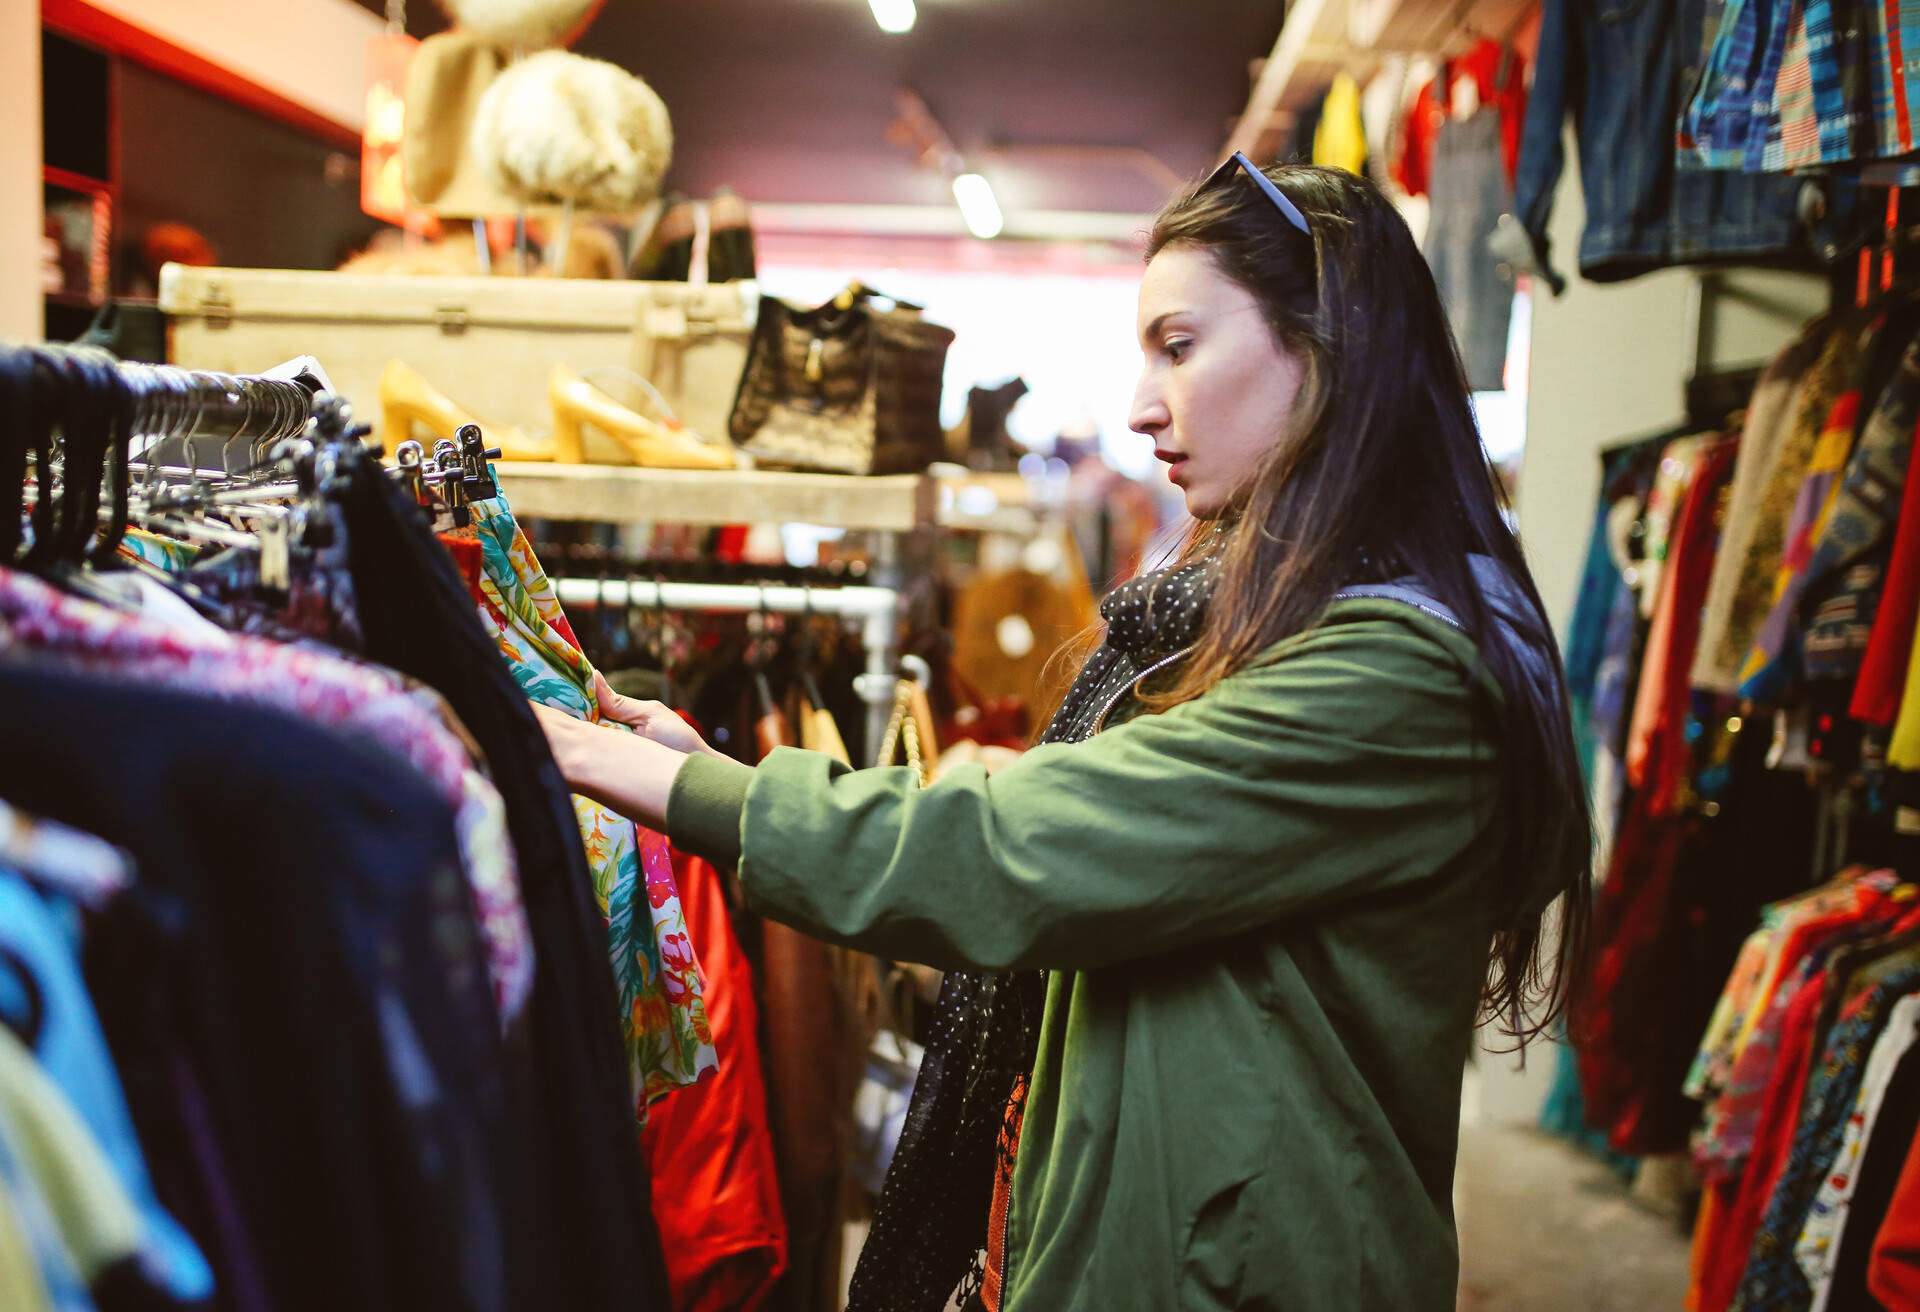 Long-haired brunette woman browsing through clothes on a rack at a thrift store.